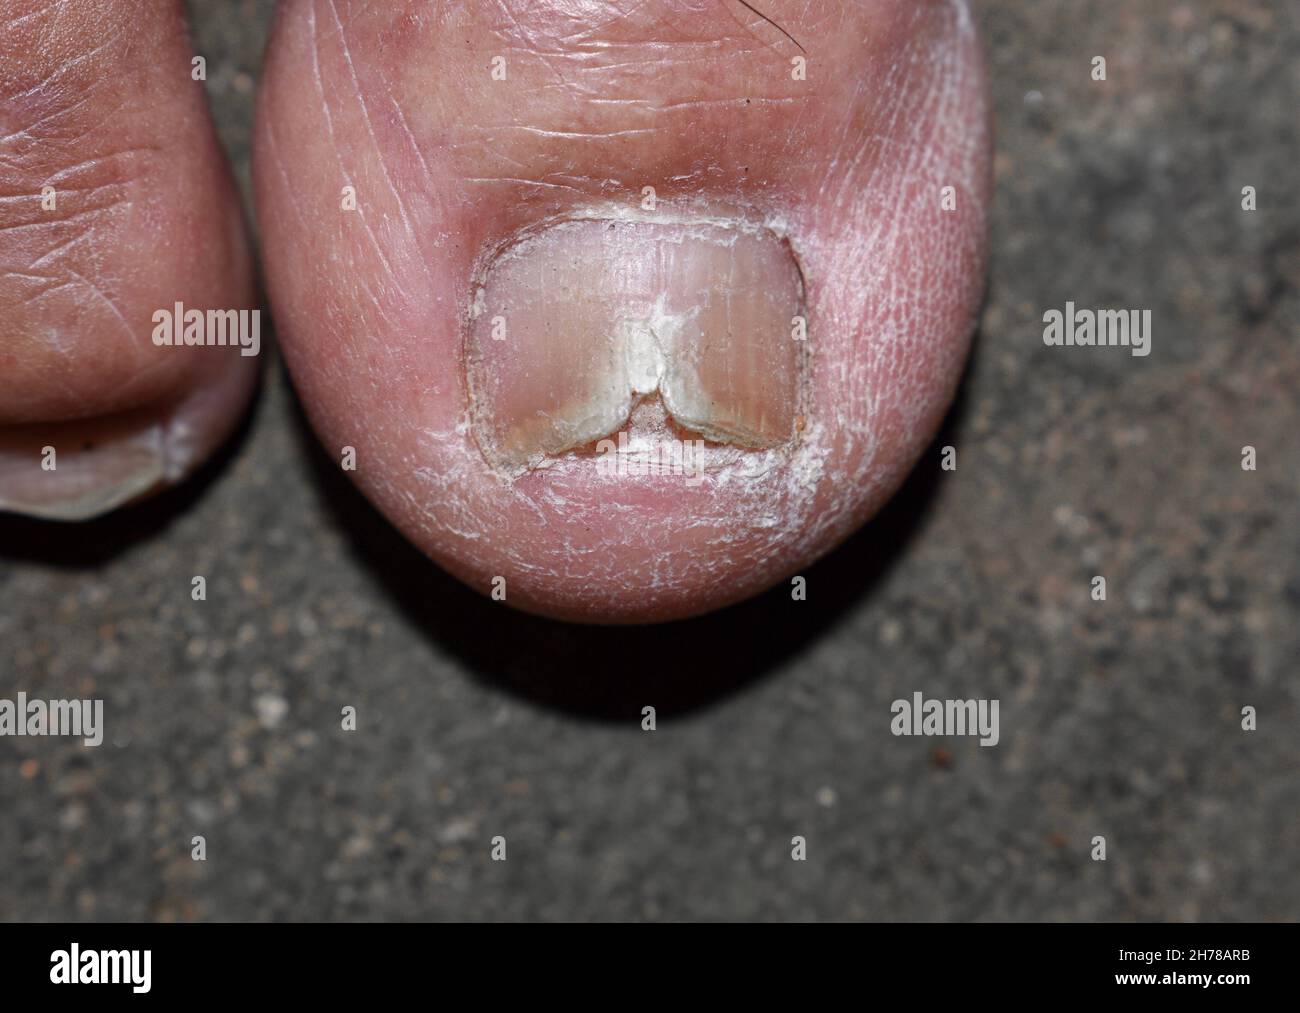 Damaged and cracked toenail. Fungal nail infection. Onychomycosis